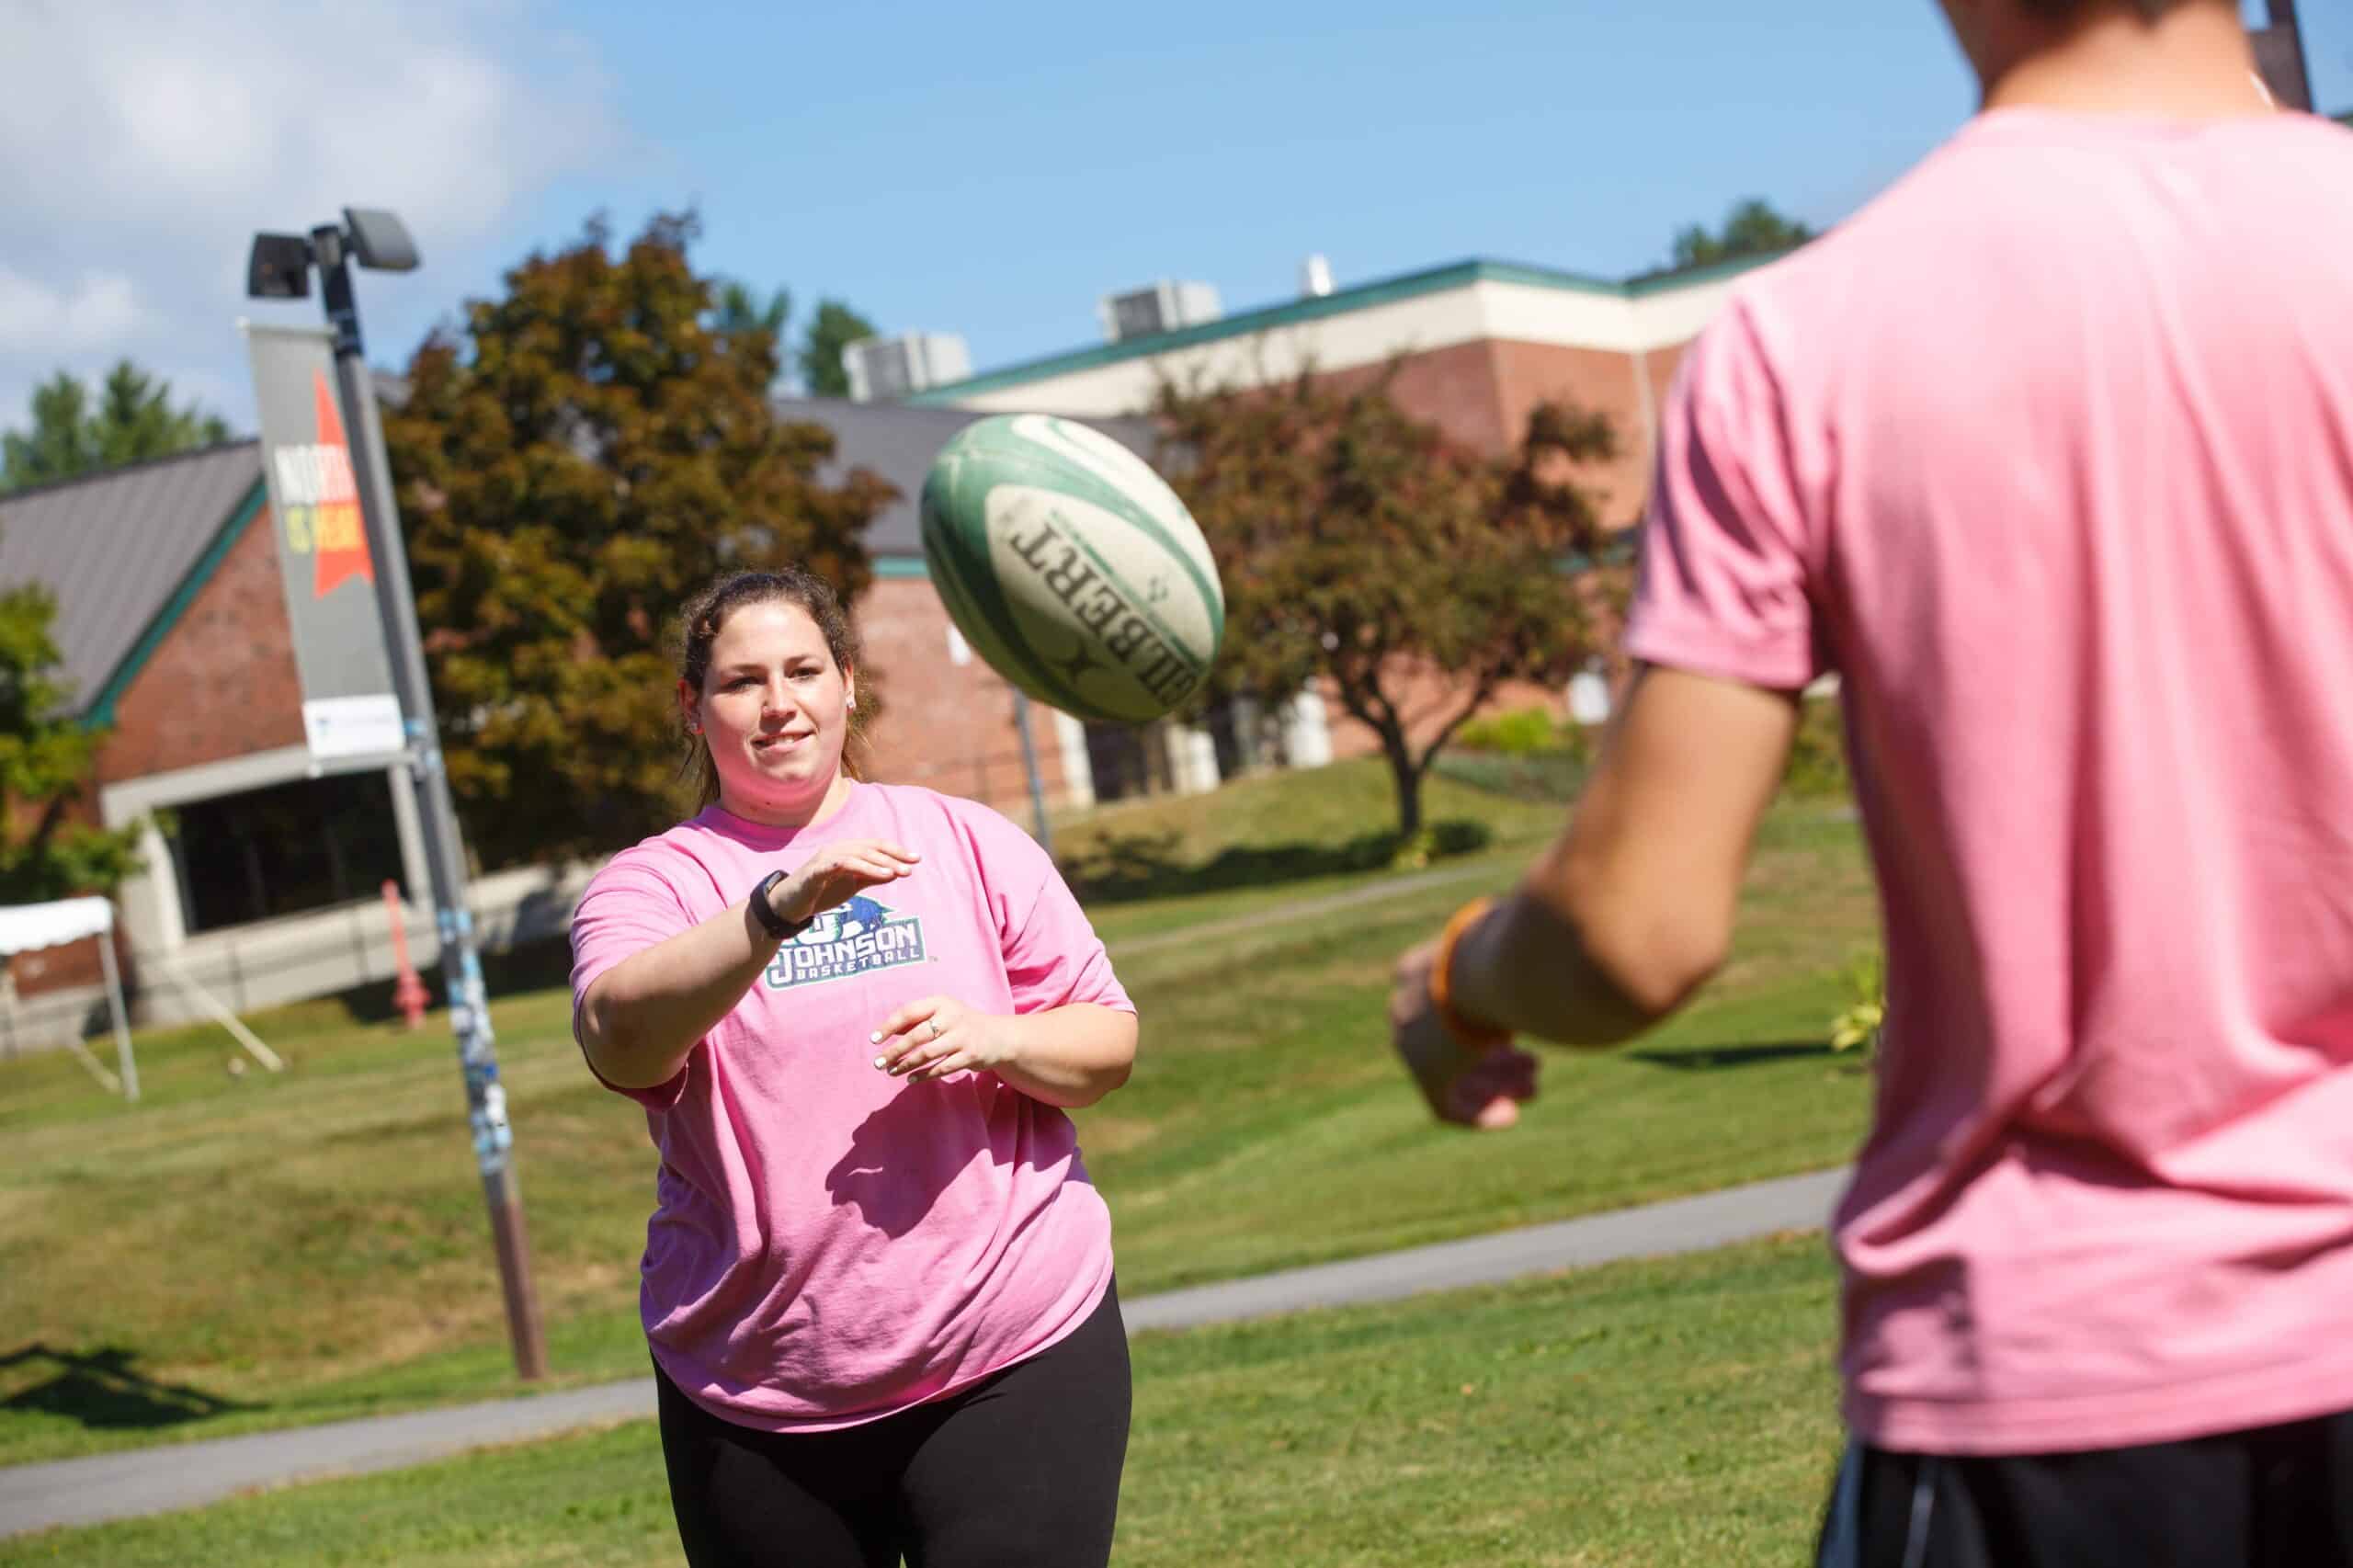 A long haired young woman in a pink shirt throws a rugby ball towards another person who's back is turned. They are outside and it's a sunny day.